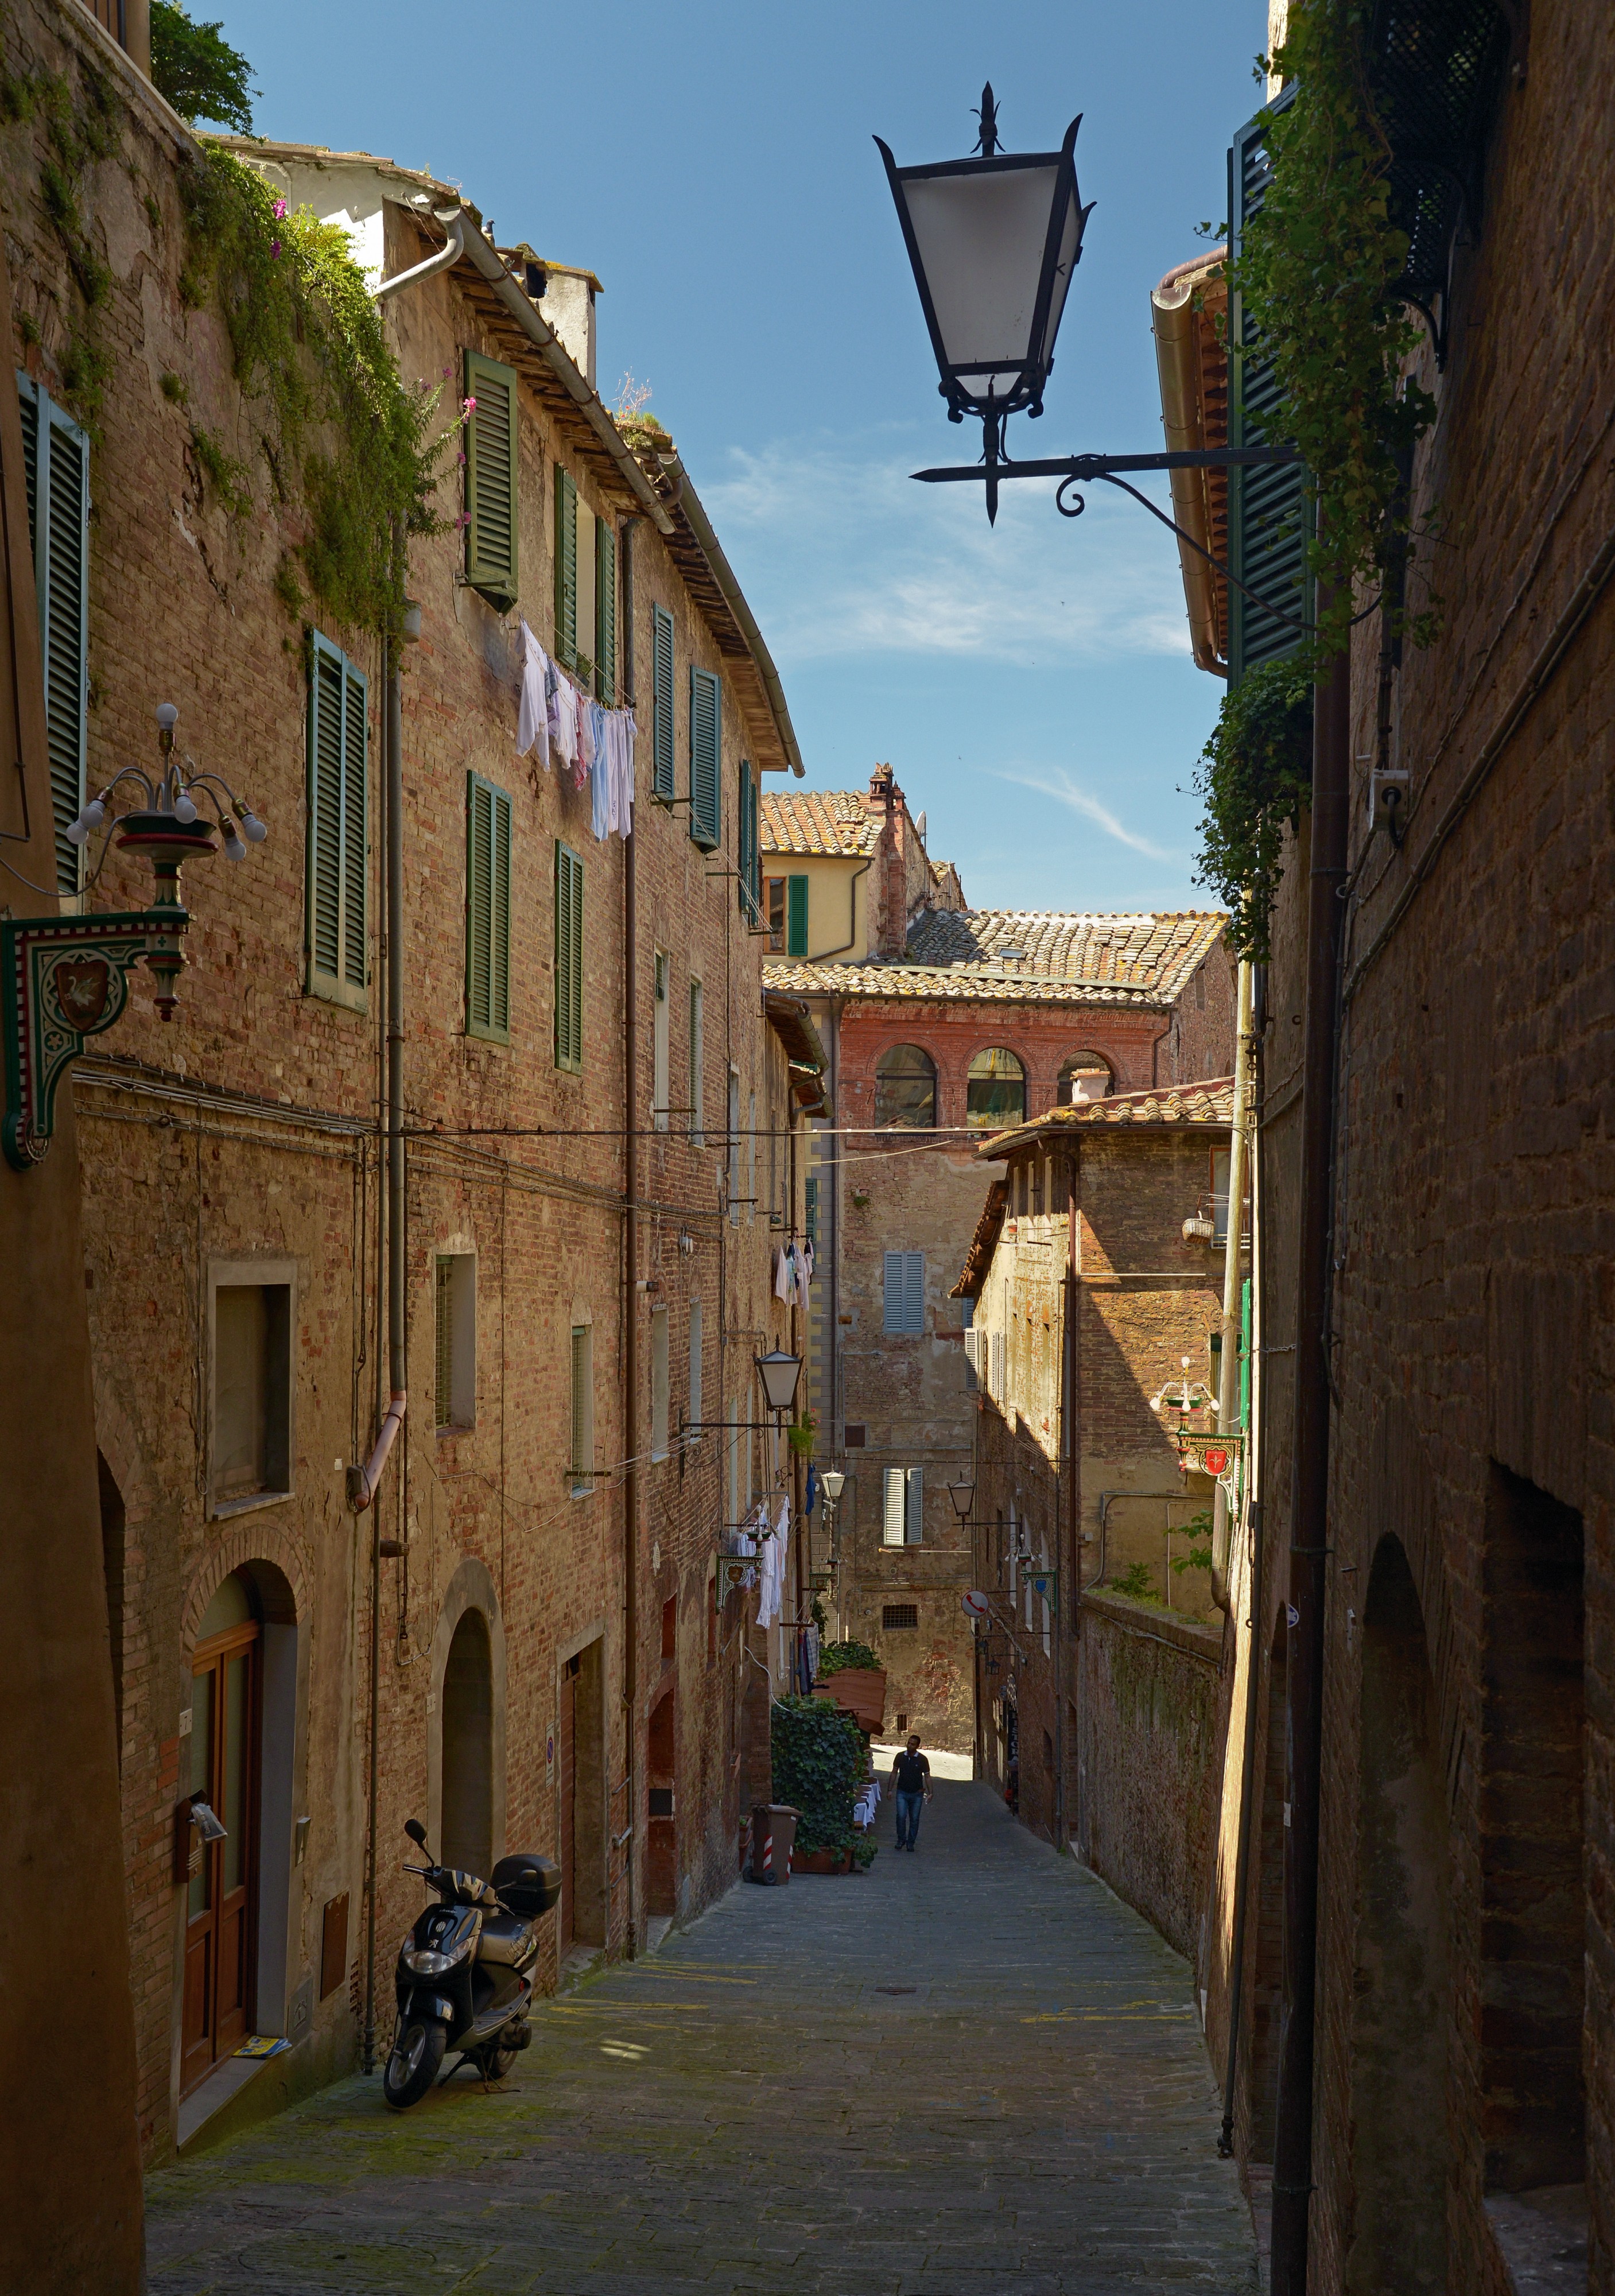 The midday. Siena, Italy